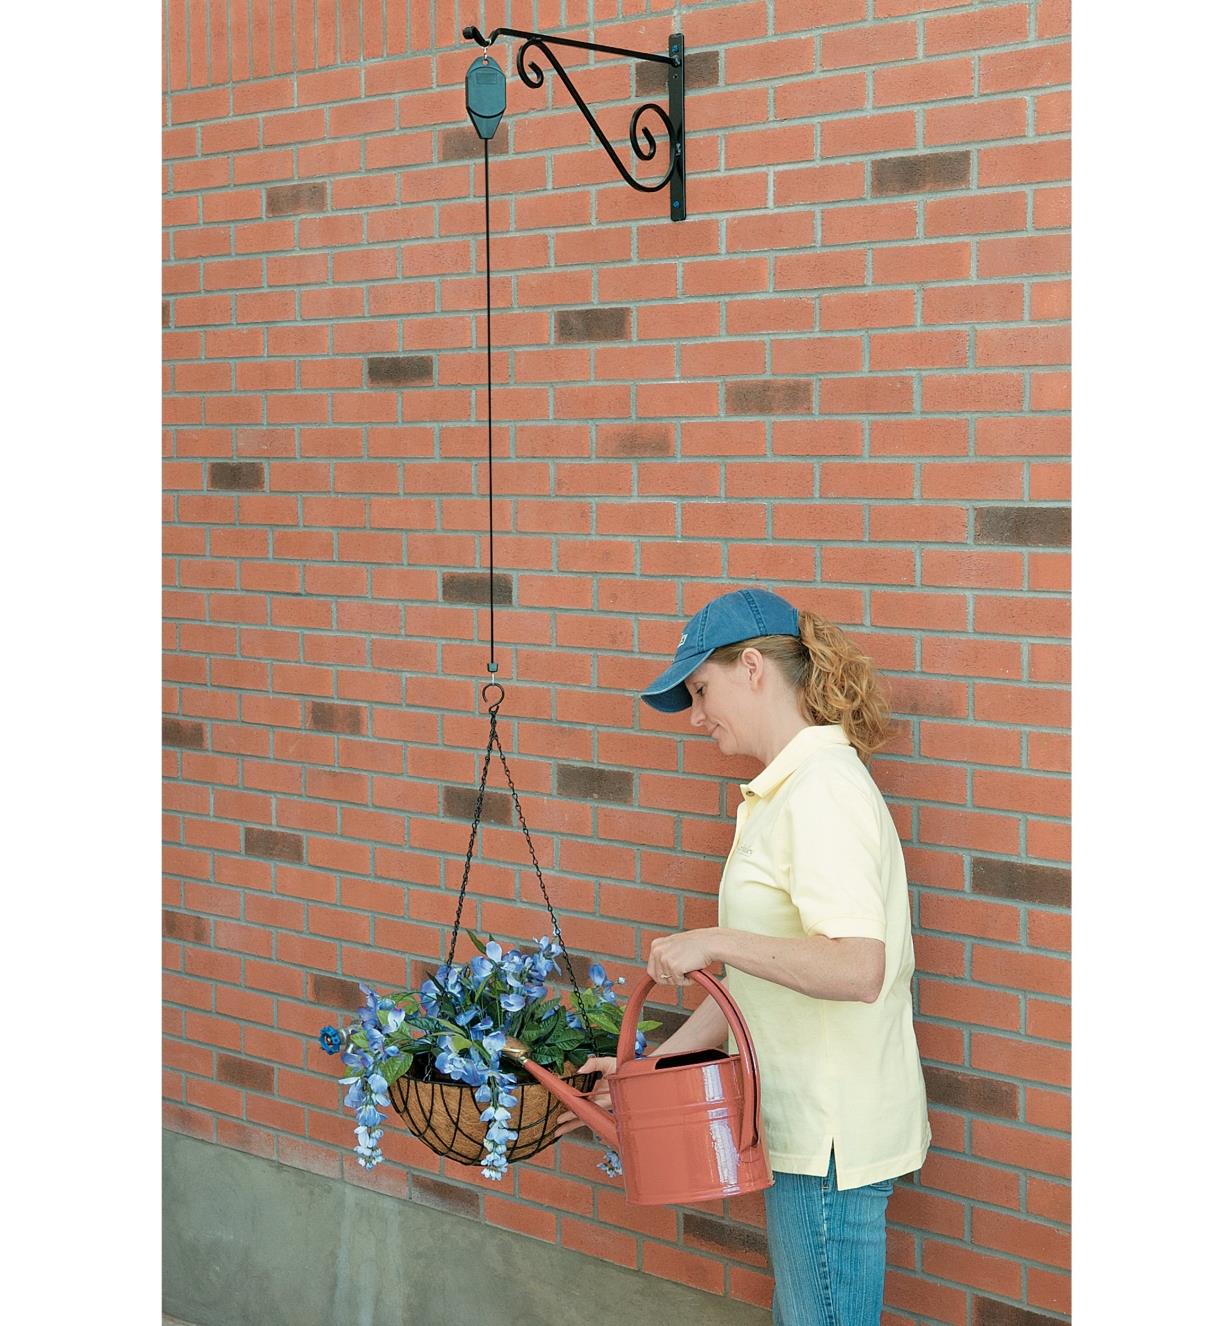 Planter basket on the Hanging Basket Pulley lowered for watering